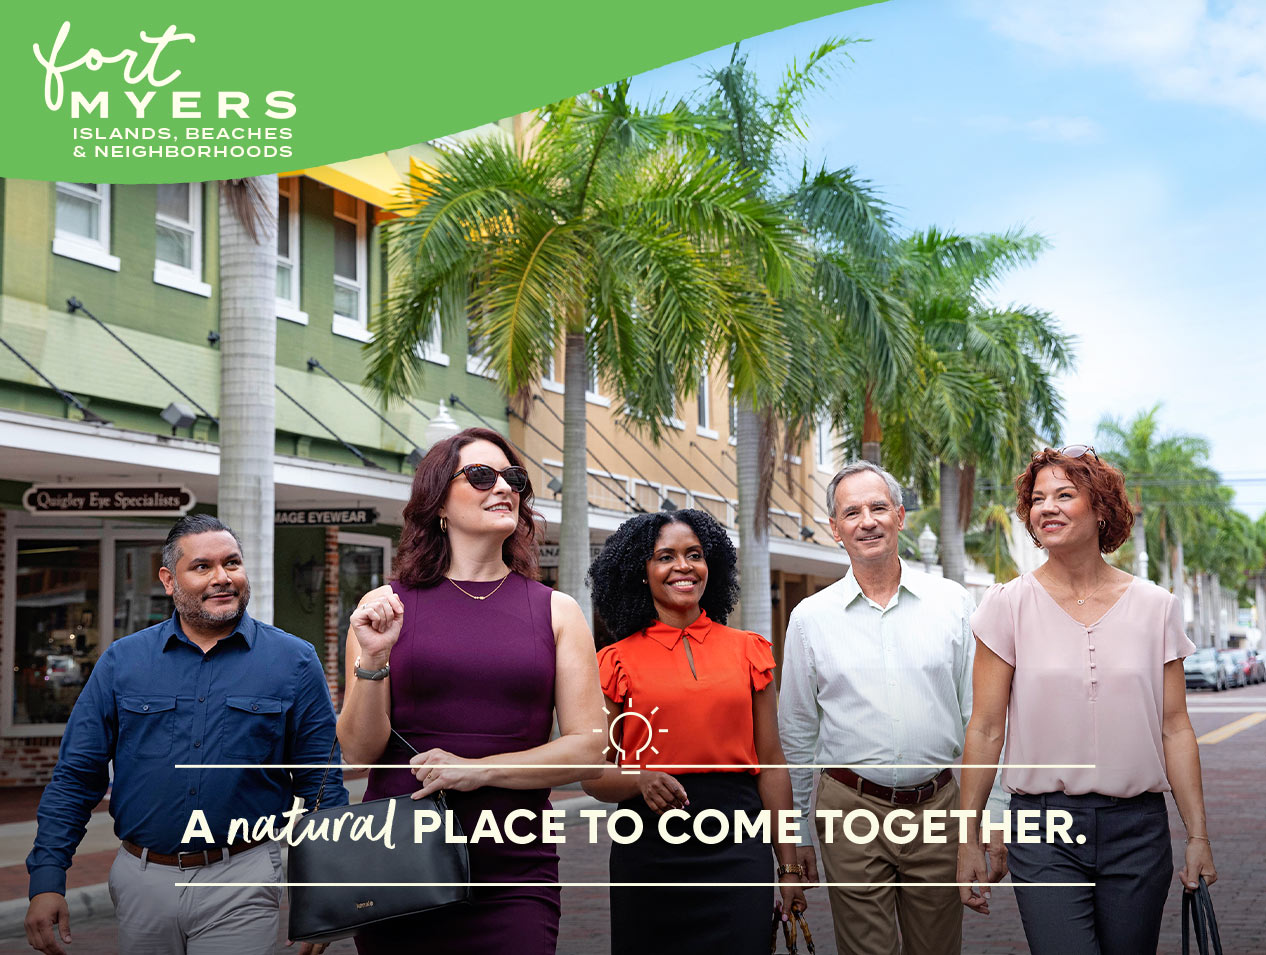 Fort Myers Islands, Beaches & Neighborhoods - A natural place to come together.